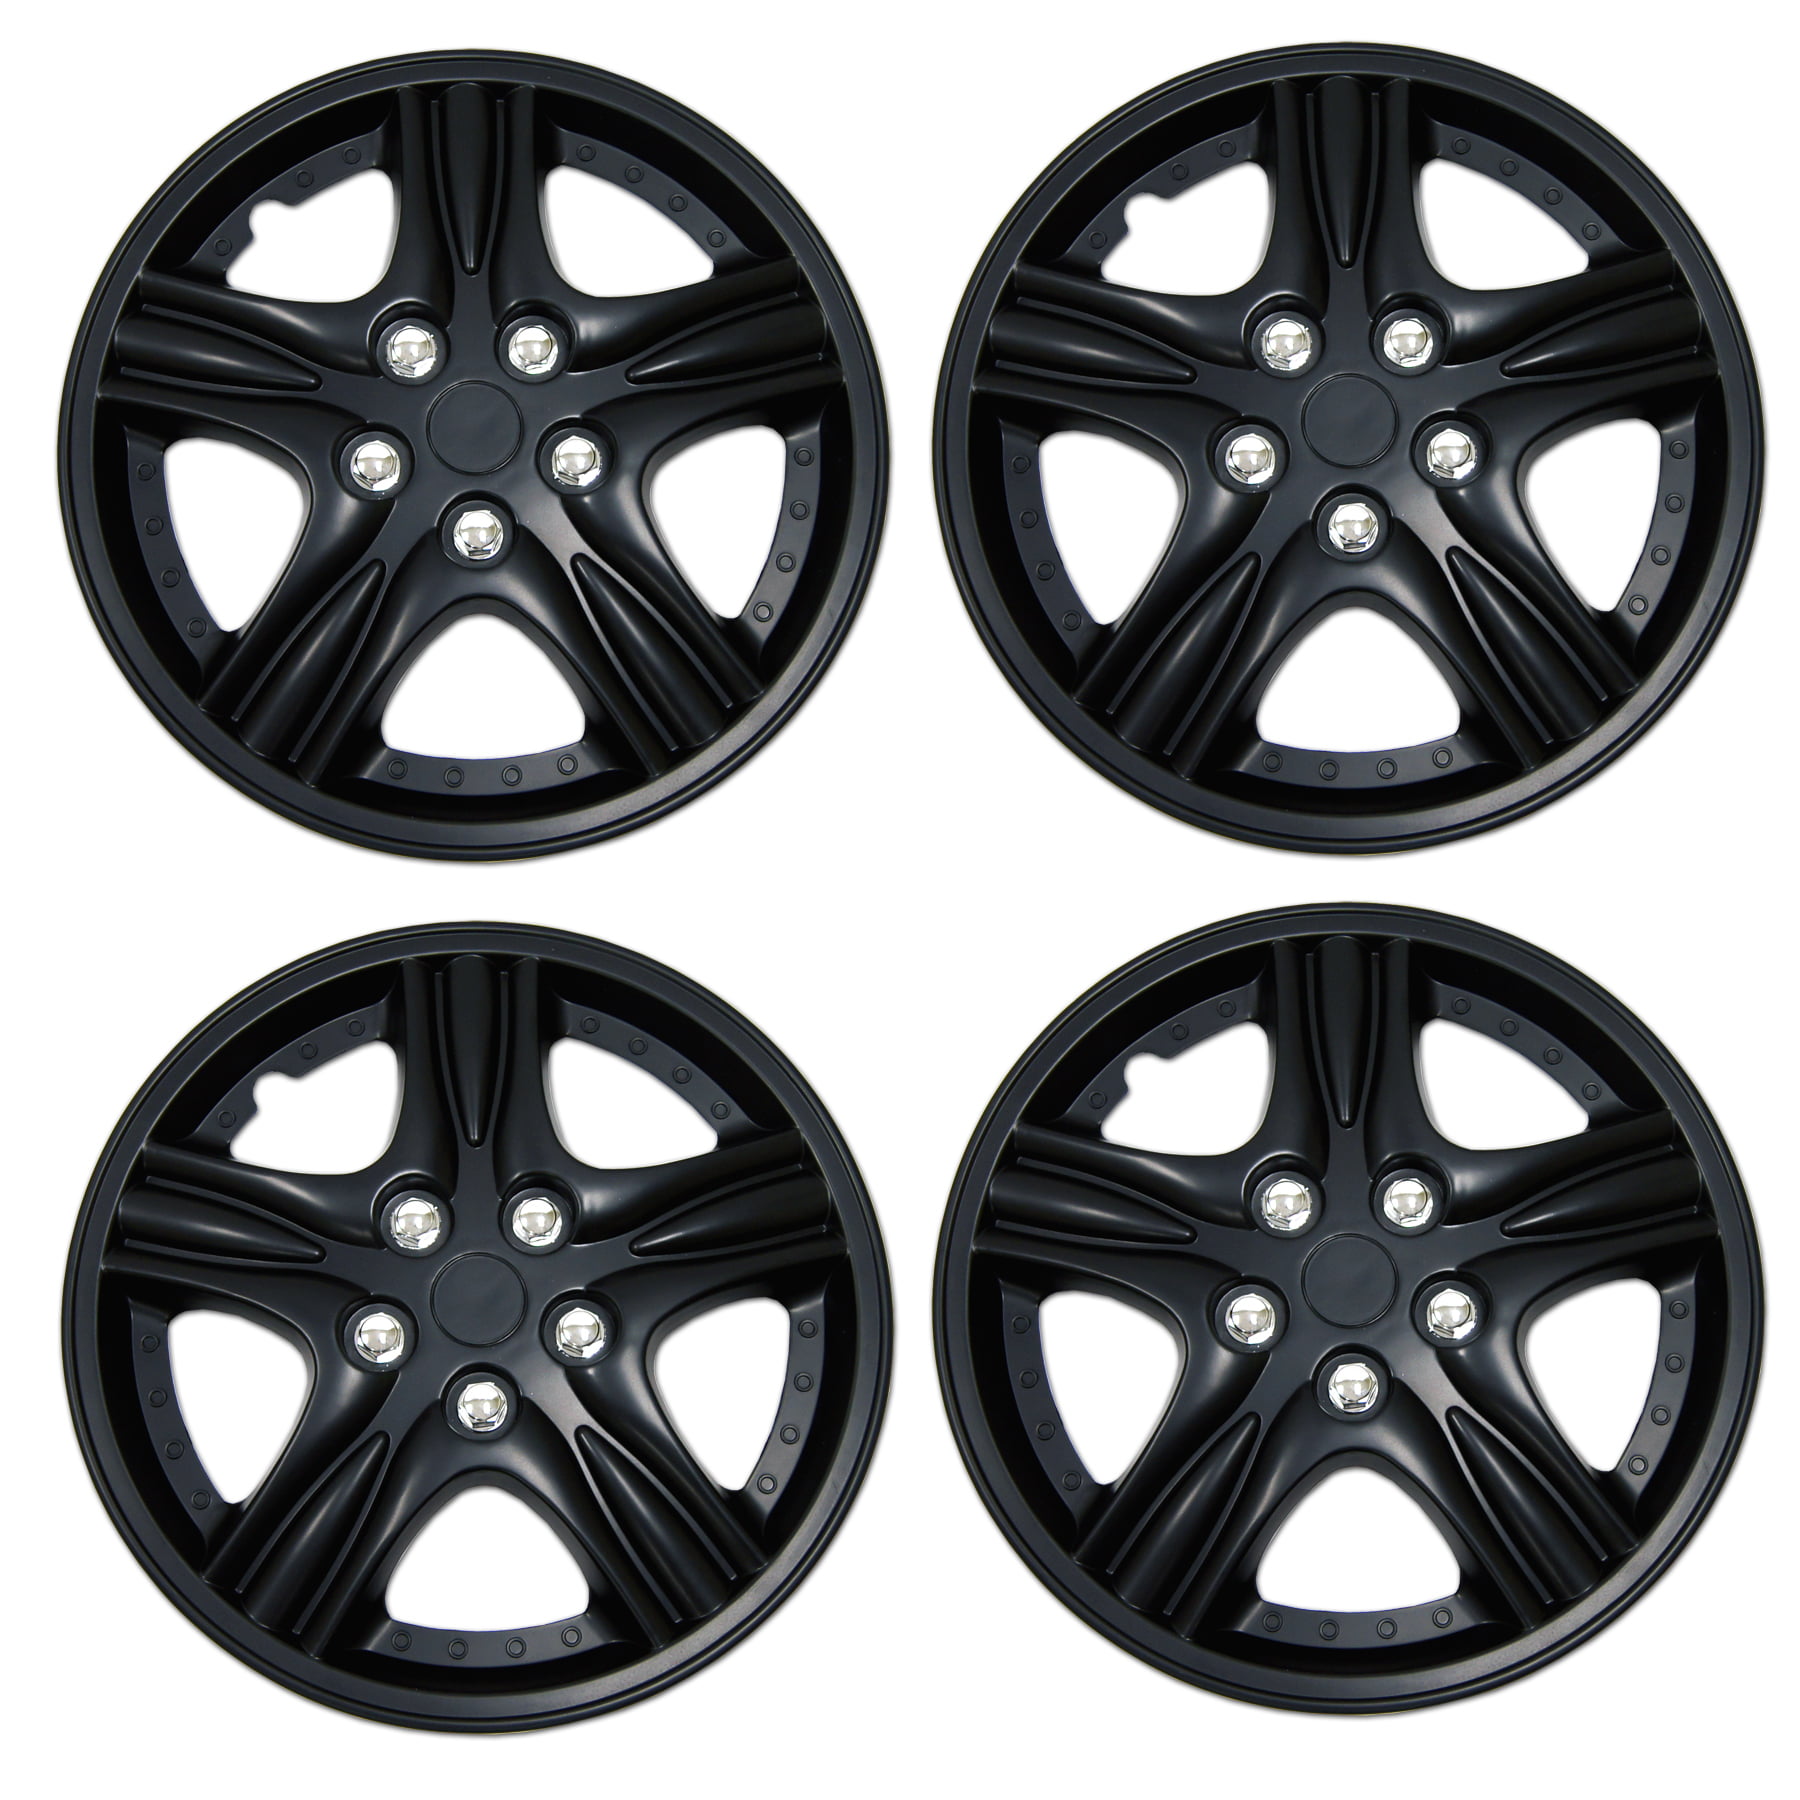 TuningPros WSC3-510B15 4pcs Set Snap-On Type 15-Inches Matte Black Hubcaps Wheel Cover Pop-On 